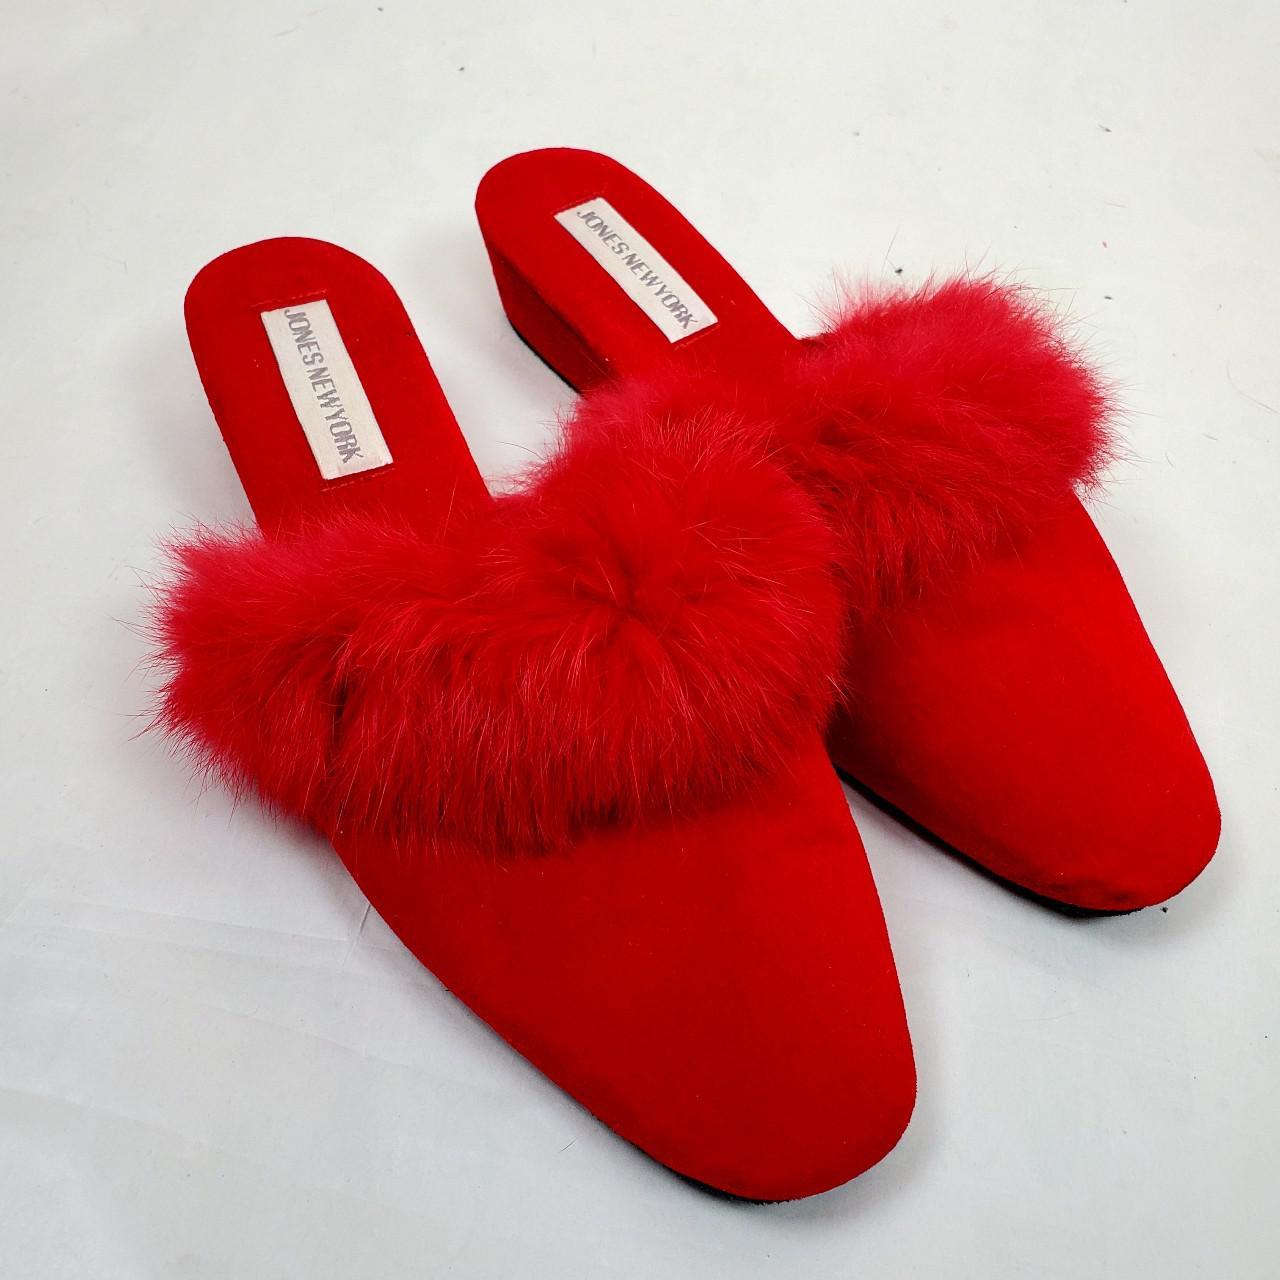 Product Image 3 - Rabbit hair red slippers. 

Tell